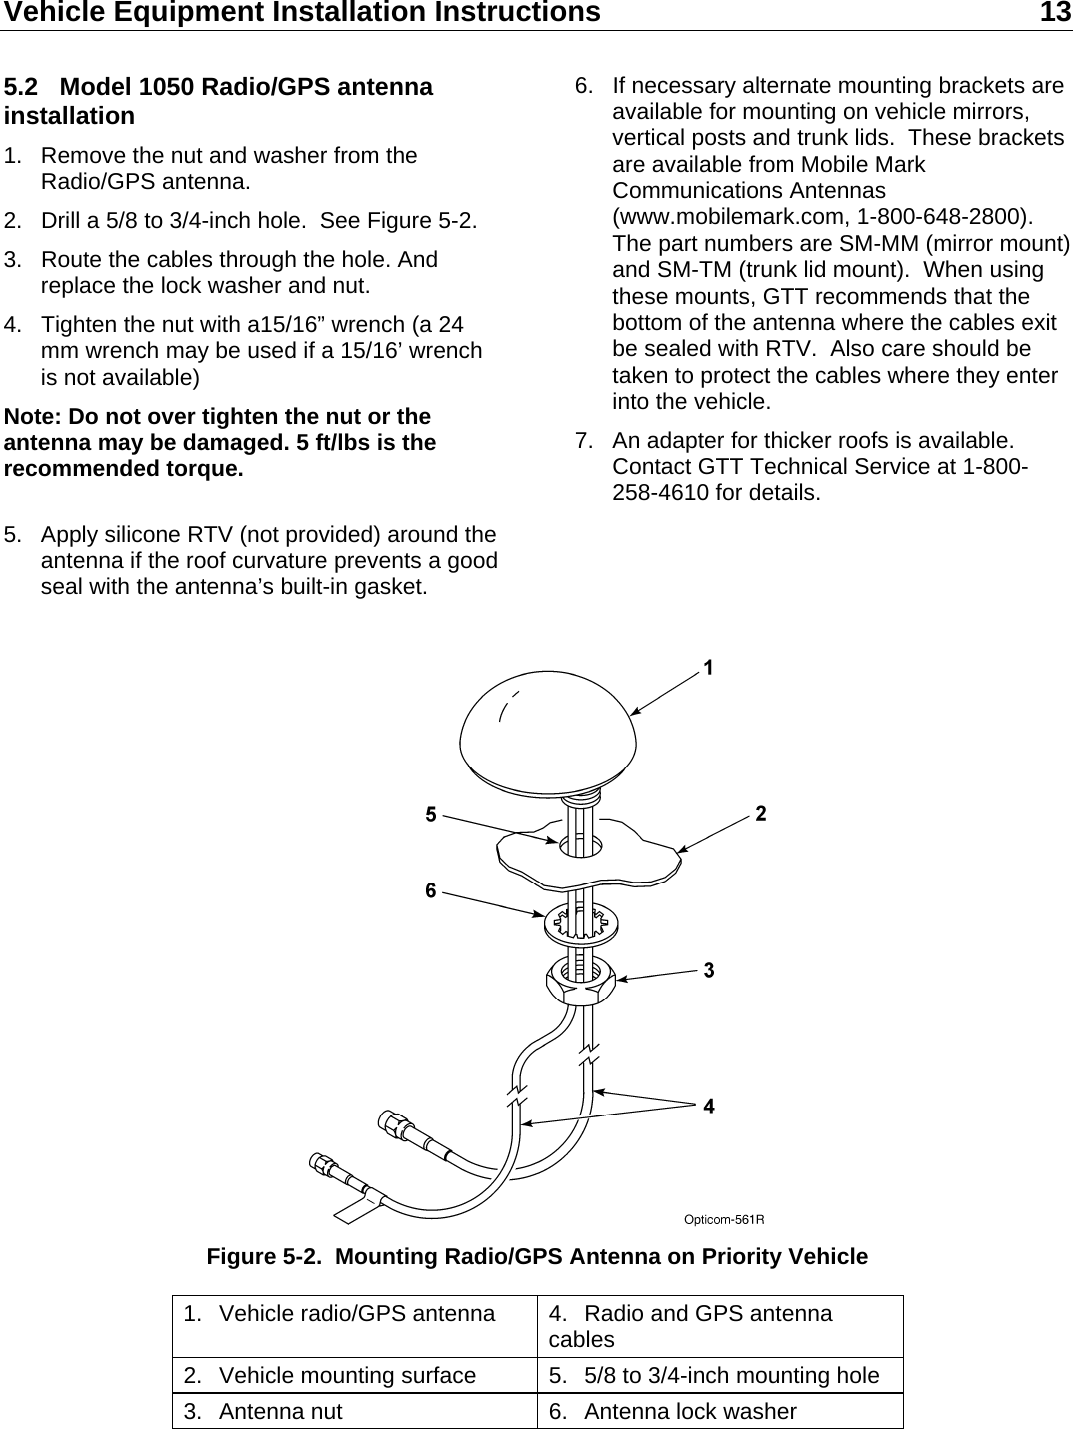 Vehicle Equipment Installation Instructions 13  5.2  Model 1050 Radio/GPS antenna installation 1.  Remove the nut and washer from the Radio/GPS antenna. 2.  Drill a 5/8 to 3/4-inch hole.  See Figure 5-2. 3.  Route the cables through the hole. And replace the lock washer and nut. 4.  Tighten the nut with a15/16” wrench (a 24 mm wrench may be used if a 15/16’ wrench is not available) Note: Do not over tighten the nut or the antenna may be damaged. 5 ft/lbs is the recommended torque.  5.  Apply silicone RTV (not provided) around the antenna if the roof curvature prevents a good seal with the antenna’s built-in gasket. 6.  If necessary alternate mounting brackets are available for mounting on vehicle mirrors, vertical posts and trunk lids.  These brackets are available from Mobile Mark Communications Antennas (www.mobilemark.com, 1-800-648-2800). The part numbers are SM-MM (mirror mount) and SM-TM (trunk lid mount).  When using these mounts, GTT recommends that the bottom of the antenna where the cables exit be sealed with RTV.  Also care should be taken to protect the cables where they enter into the vehicle. 7.  An adapter for thicker roofs is available.  Contact GTT Technical Service at 1-800-258-4610 for details.    Figure 5-2.  Mounting Radio/GPS Antenna on Priority Vehicle 1.  Vehicle radio/GPS antenna  4.  Radio and GPS antenna cables 2.  Vehicle mounting surface  5.  5/8 to 3/4-inch mounting hole 3.  Antenna nut  6.  Antenna lock washer 